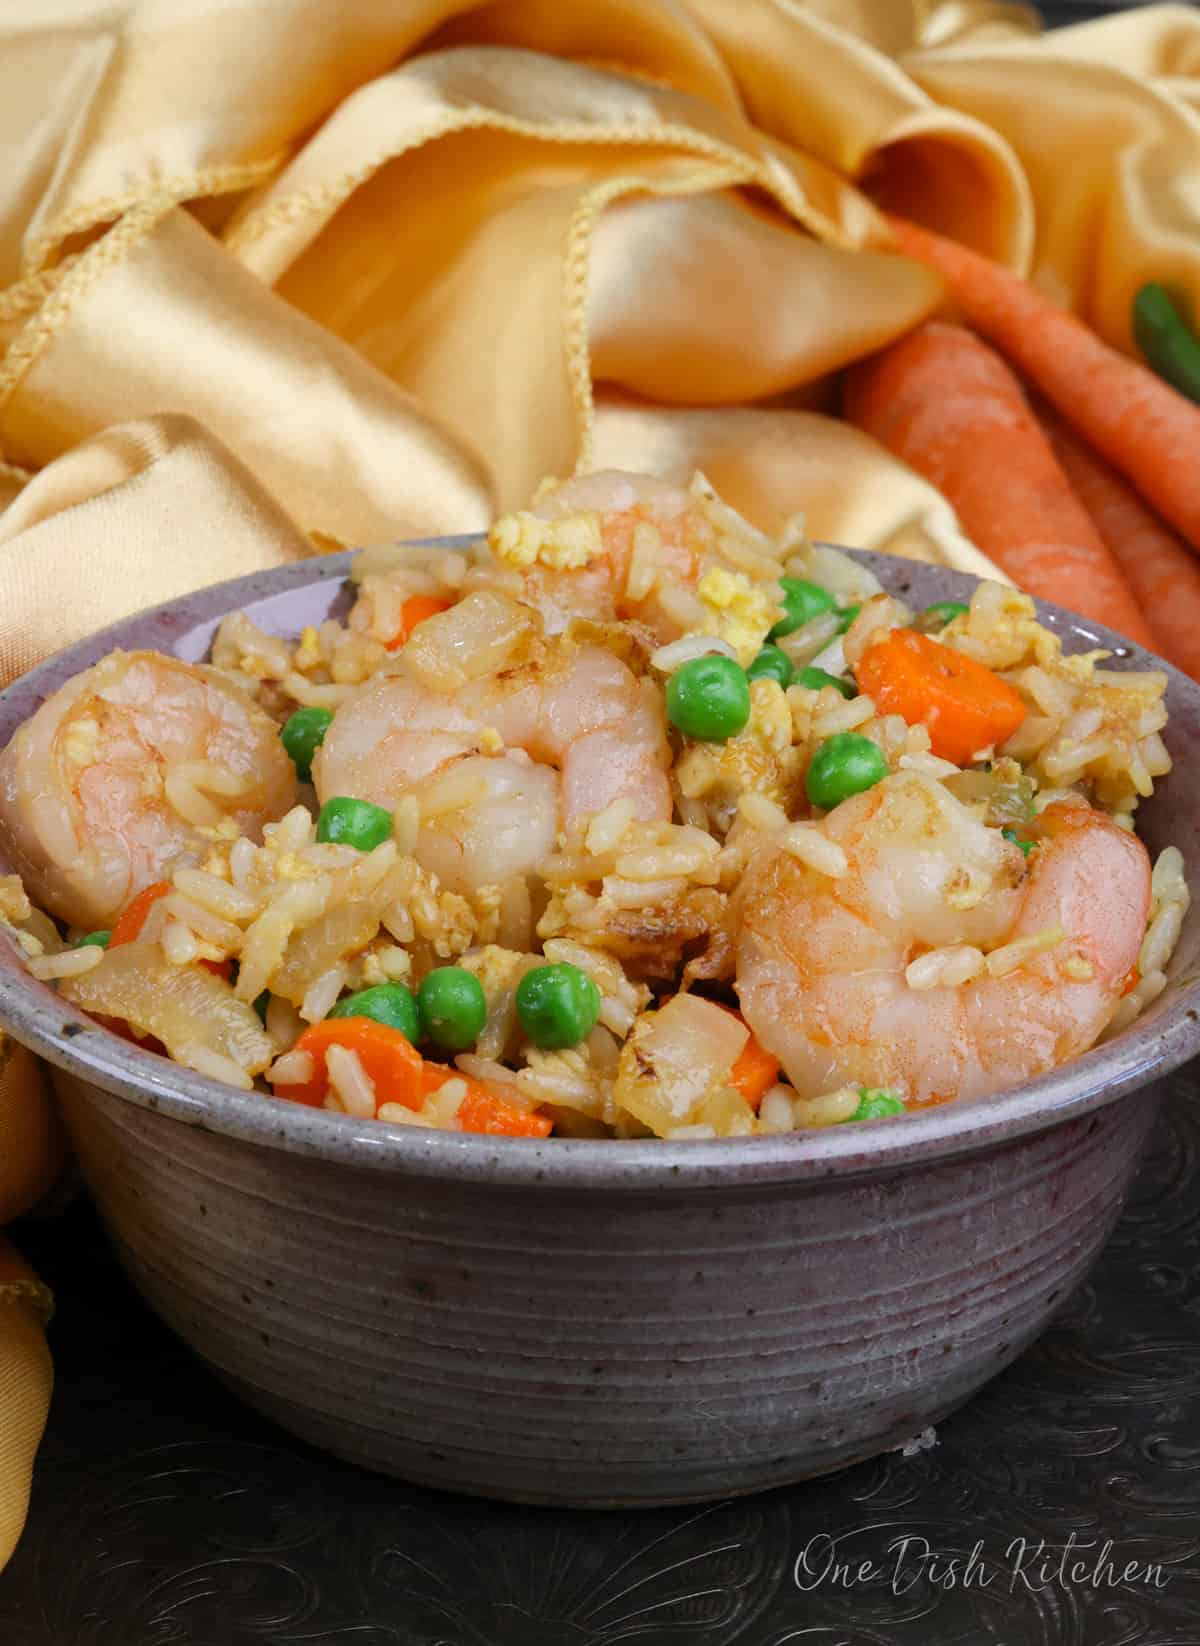 a bowl of shrimp fried rice next to three carrots and a gold napkin